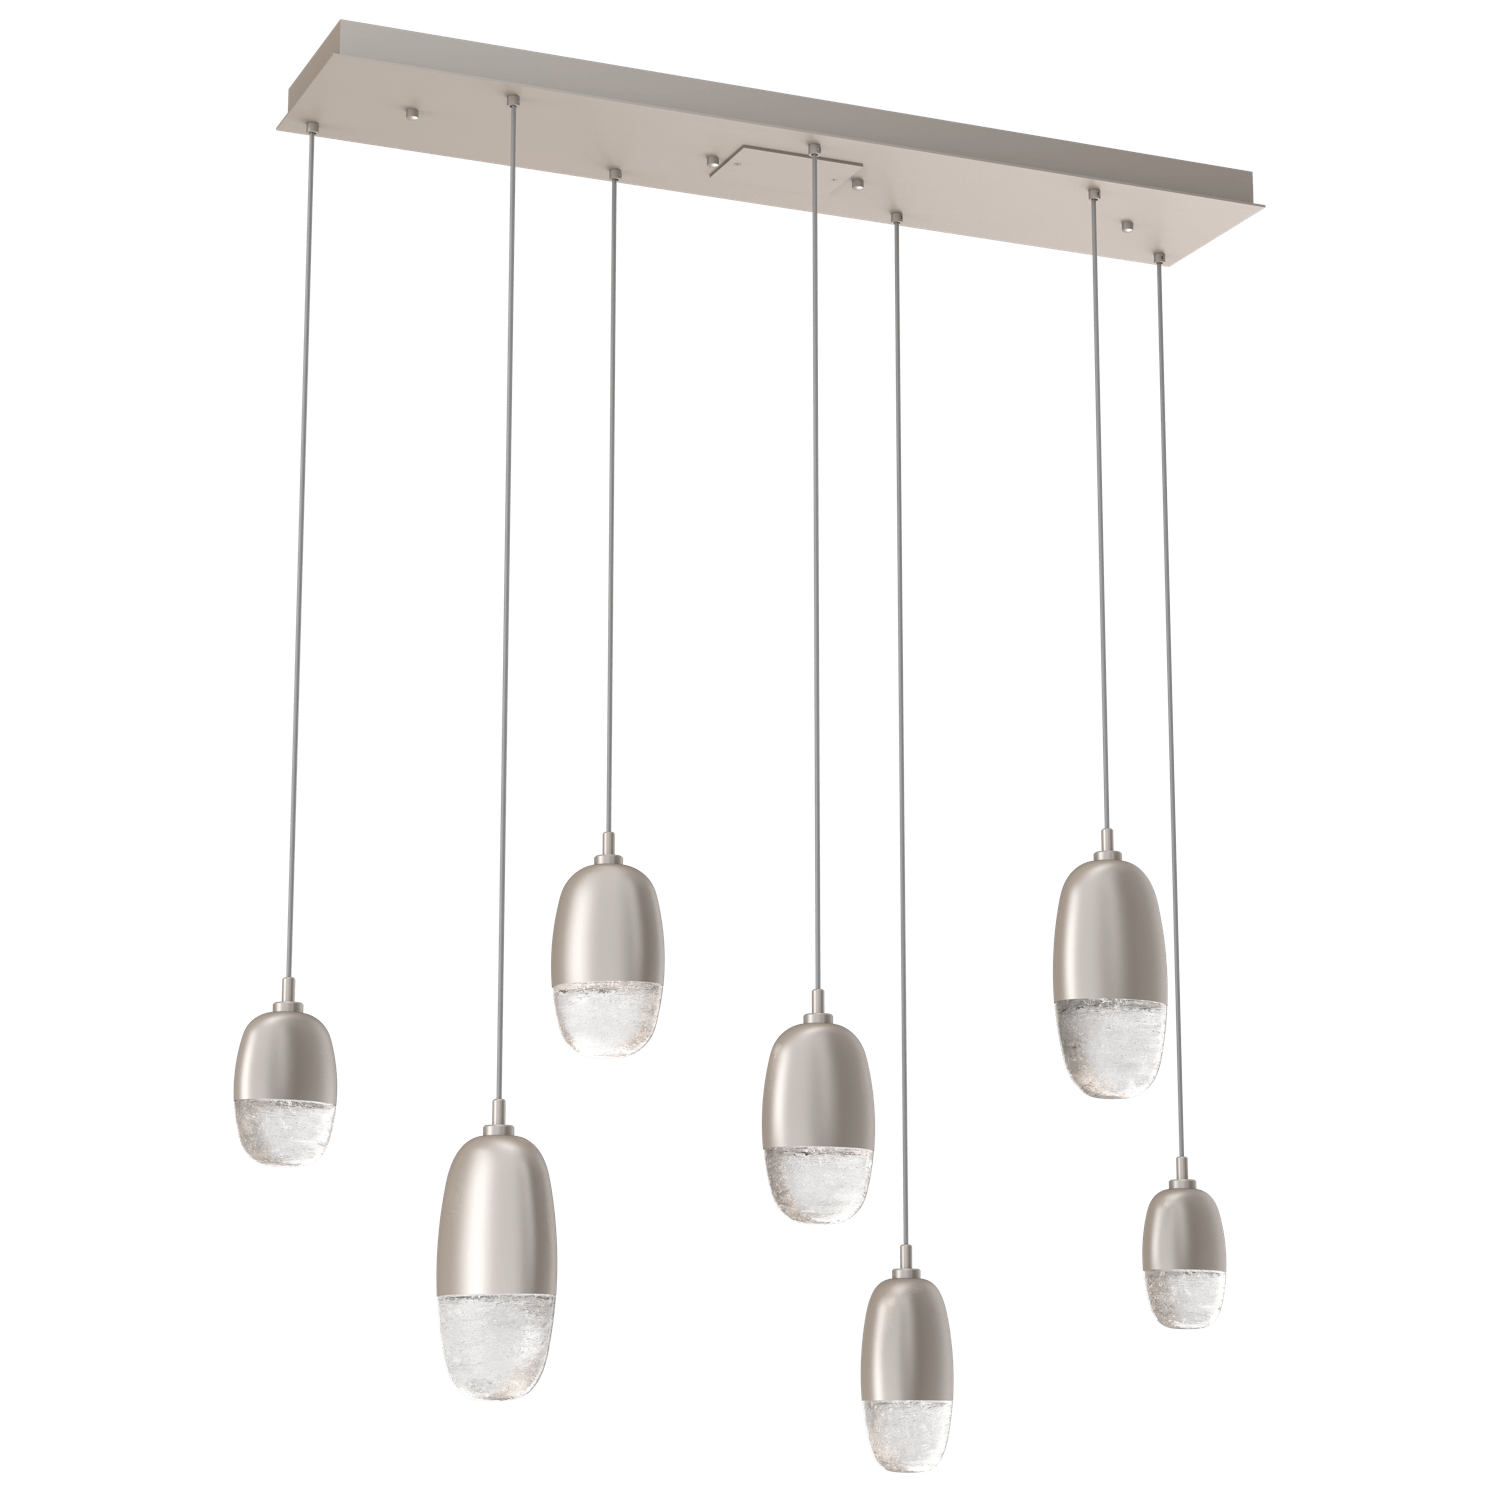 PLB0079-07-BS-Hammerton-Studio-Pebble-7-light-linear-pendant-chandelier-with-metallic-beige-silver-finish-and-clear-cast-glass-shades-and-LED-lamping